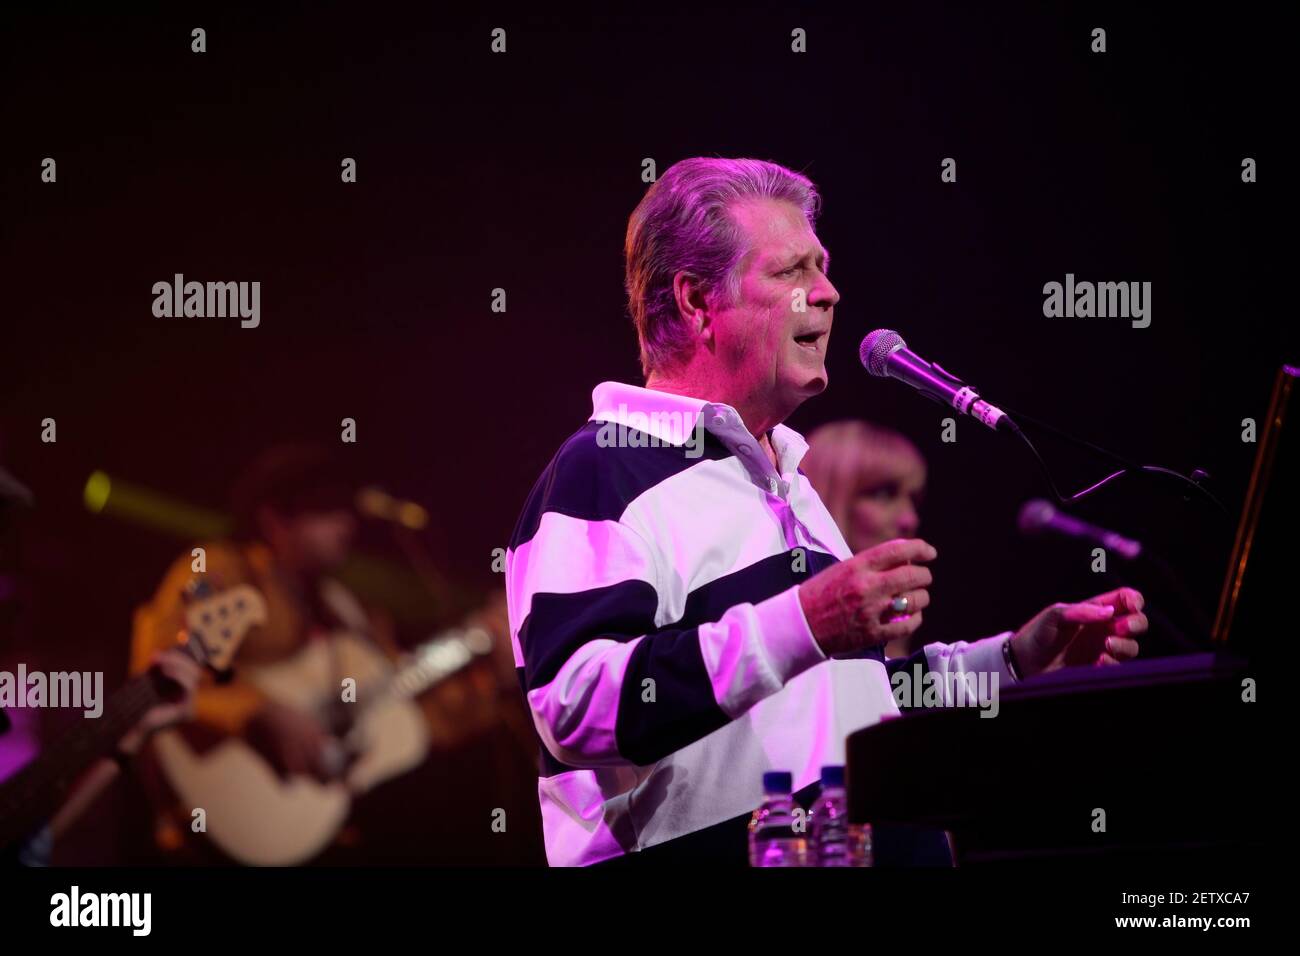 Brian Wilson, the American musician, singer, songwriter, and record producer who co-founded the Beach Boys. Performing live at The Festival Theatre, Edinburgh, Scotland. Stock Photo